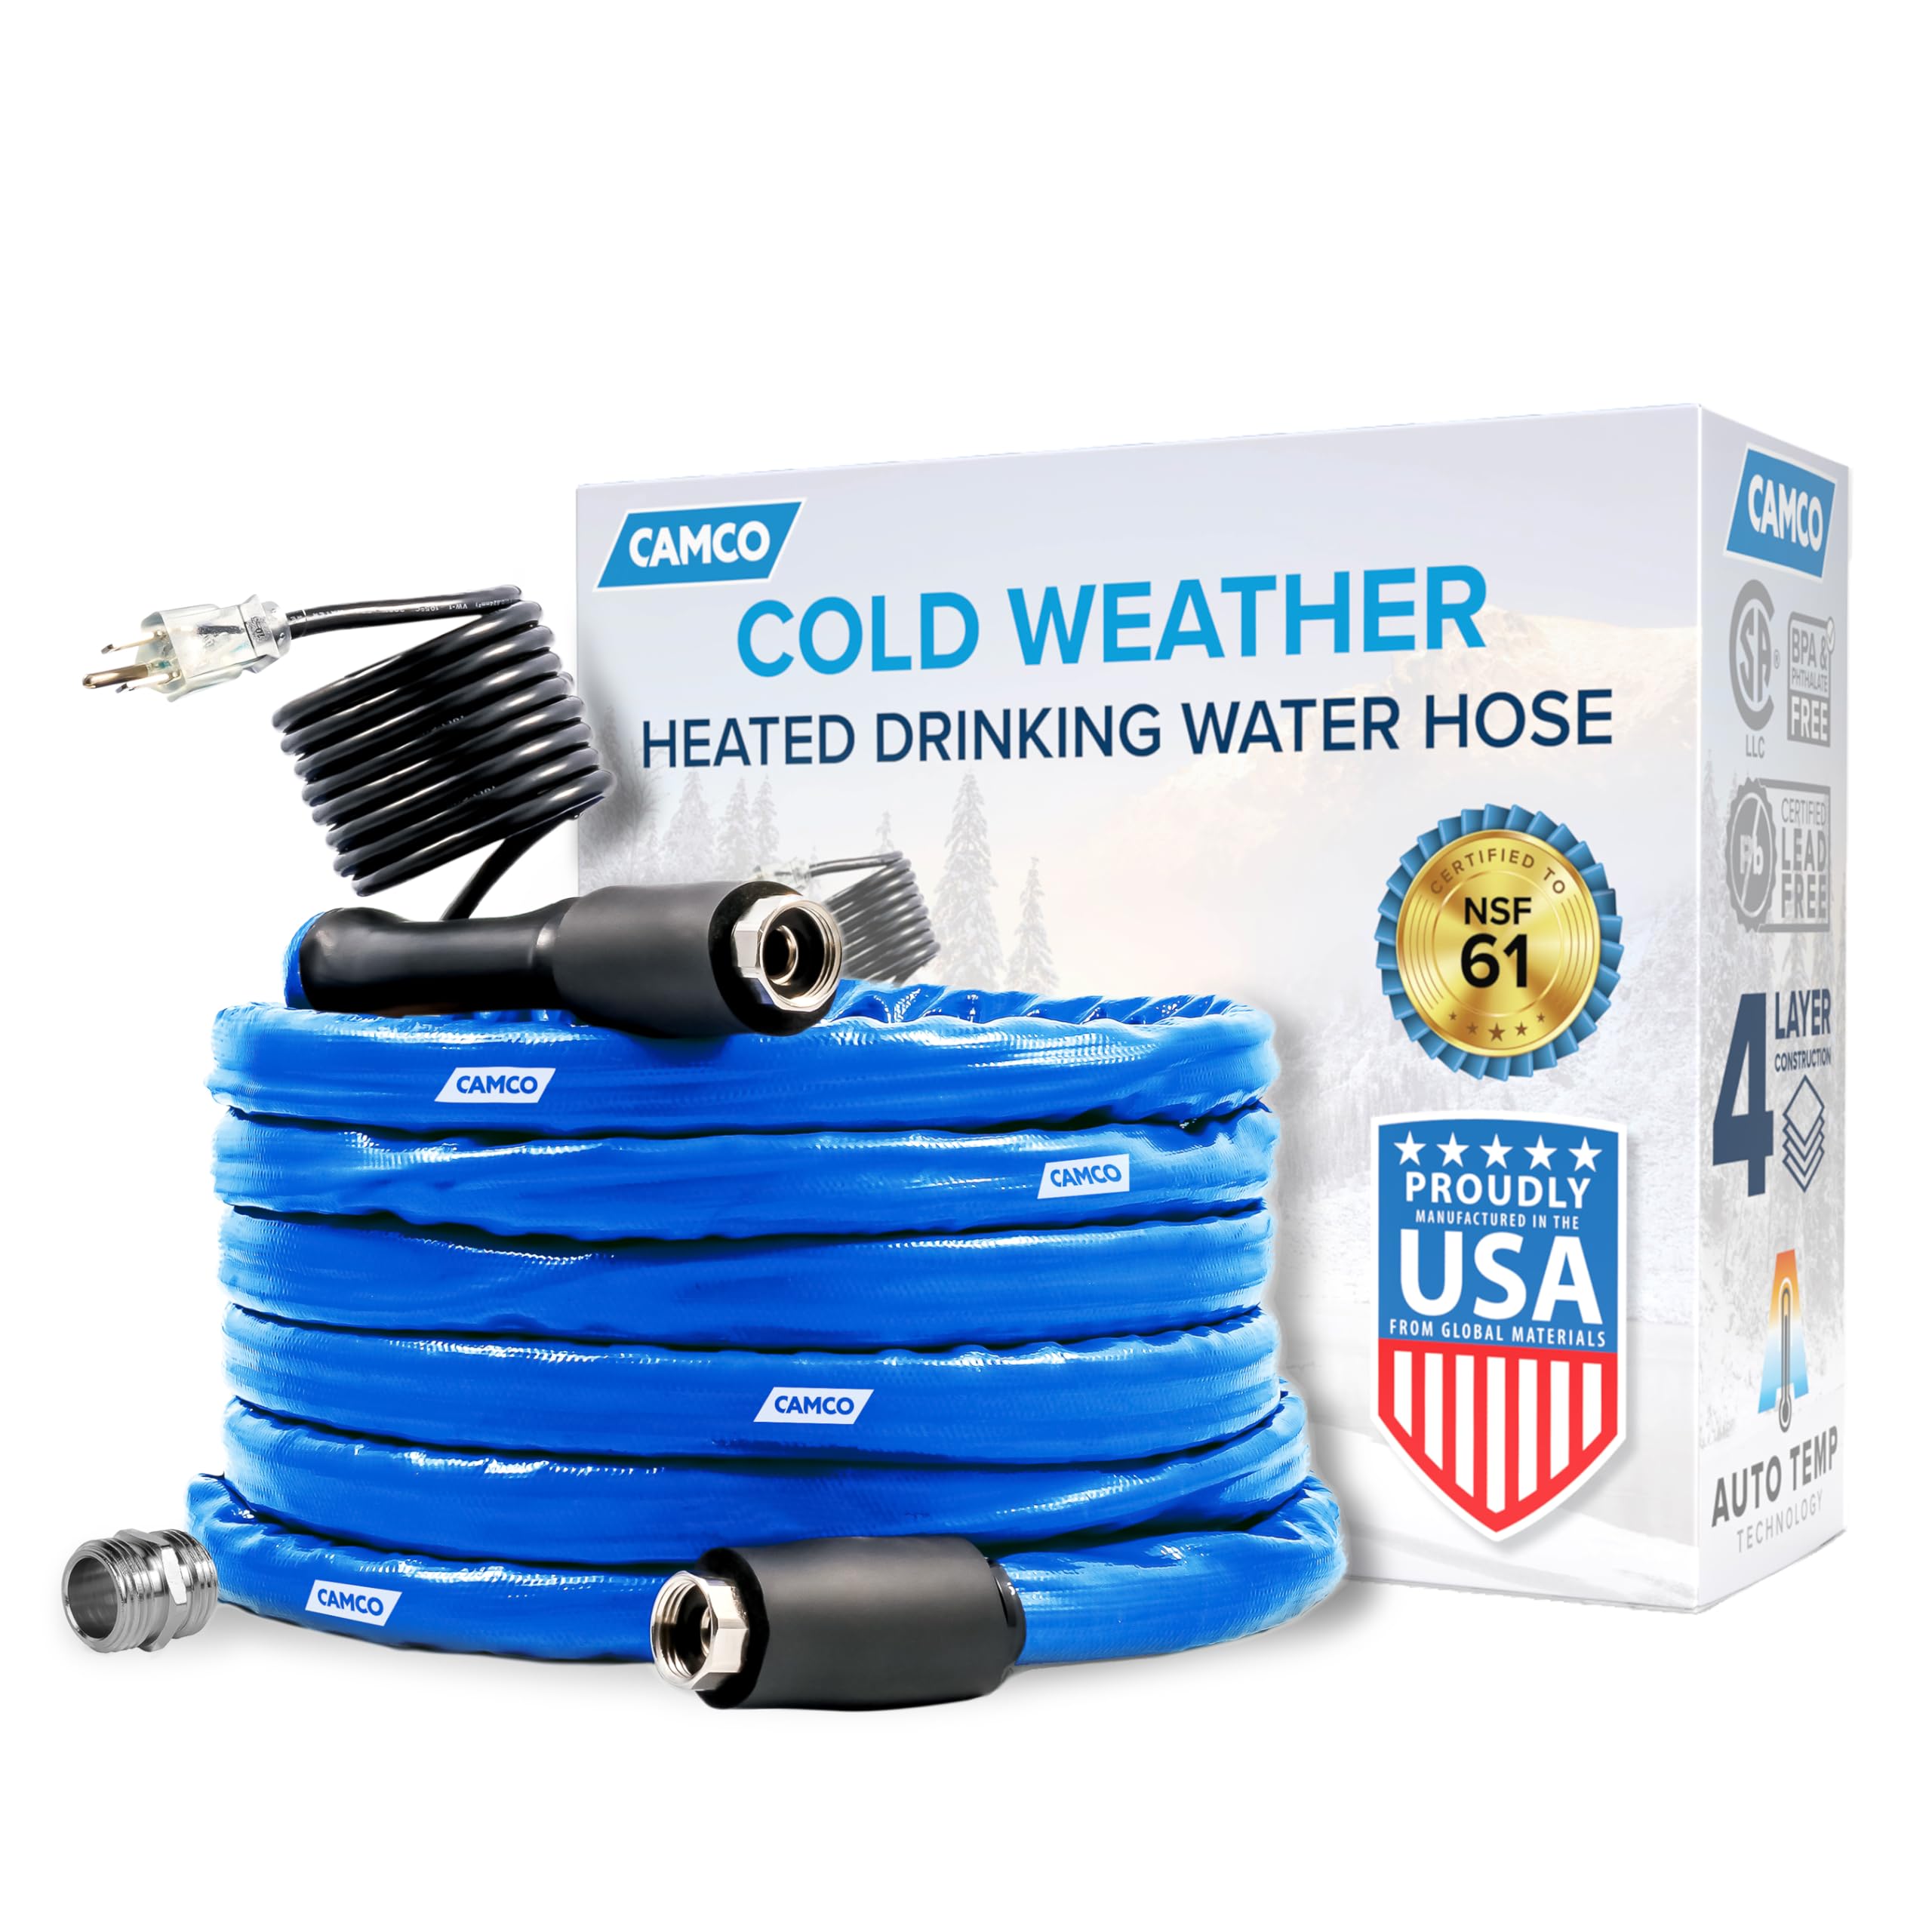 Camco 50-Foot Heated Drinking Water Hose | Features Water Line Freeze Protection Down to -20°F/-28°C & Energy-Saving Thermostat | Includes Adapter for Connection to Either End of Hose (22912)